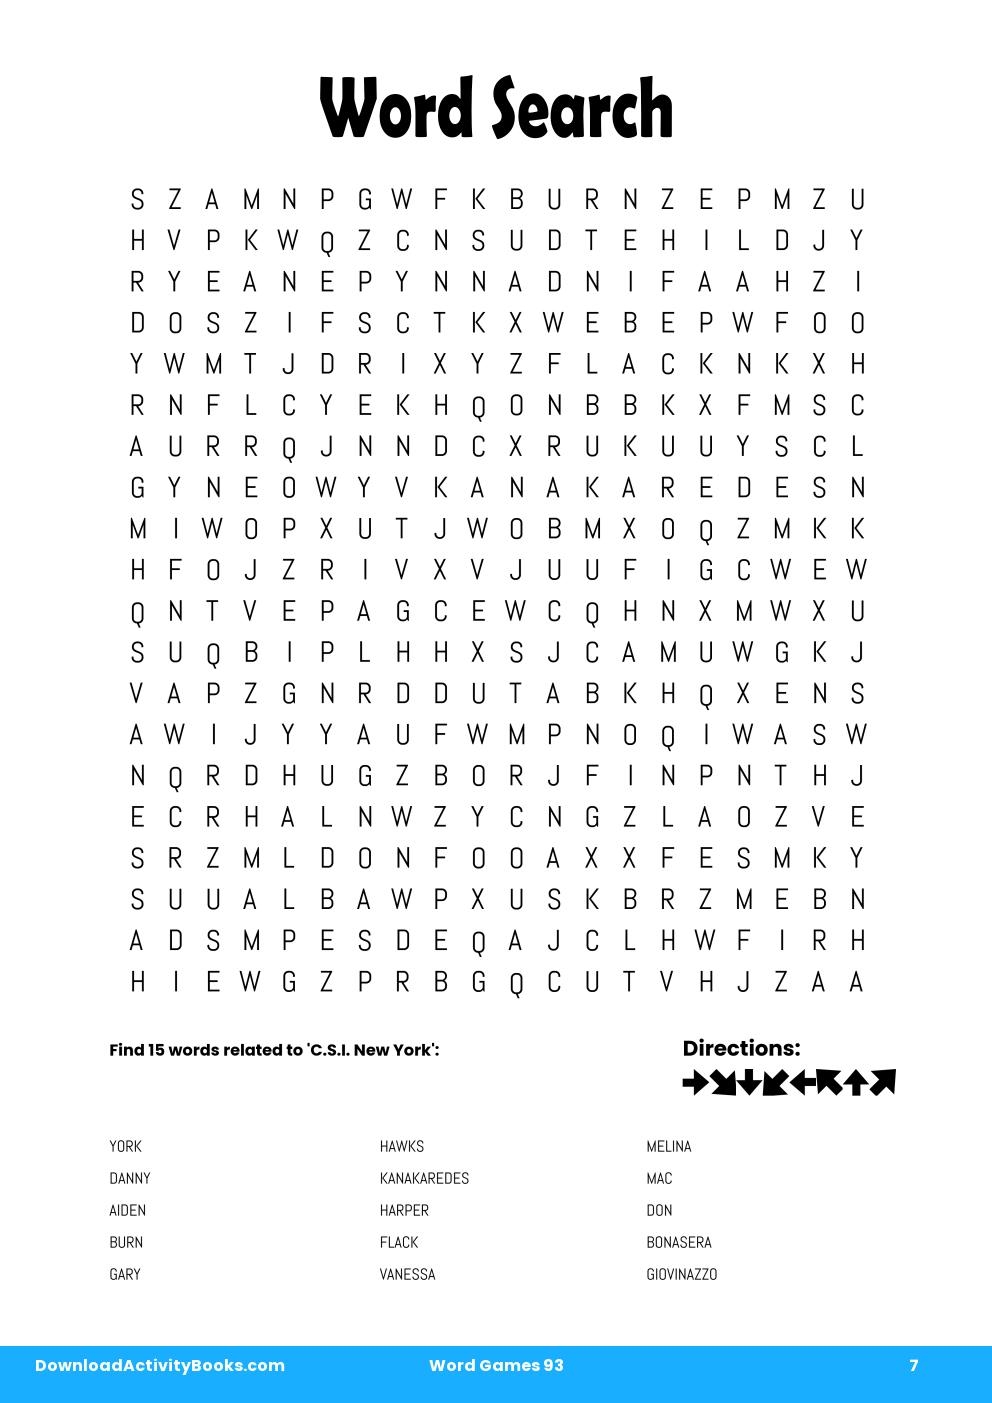 Word Search in Word Games 93